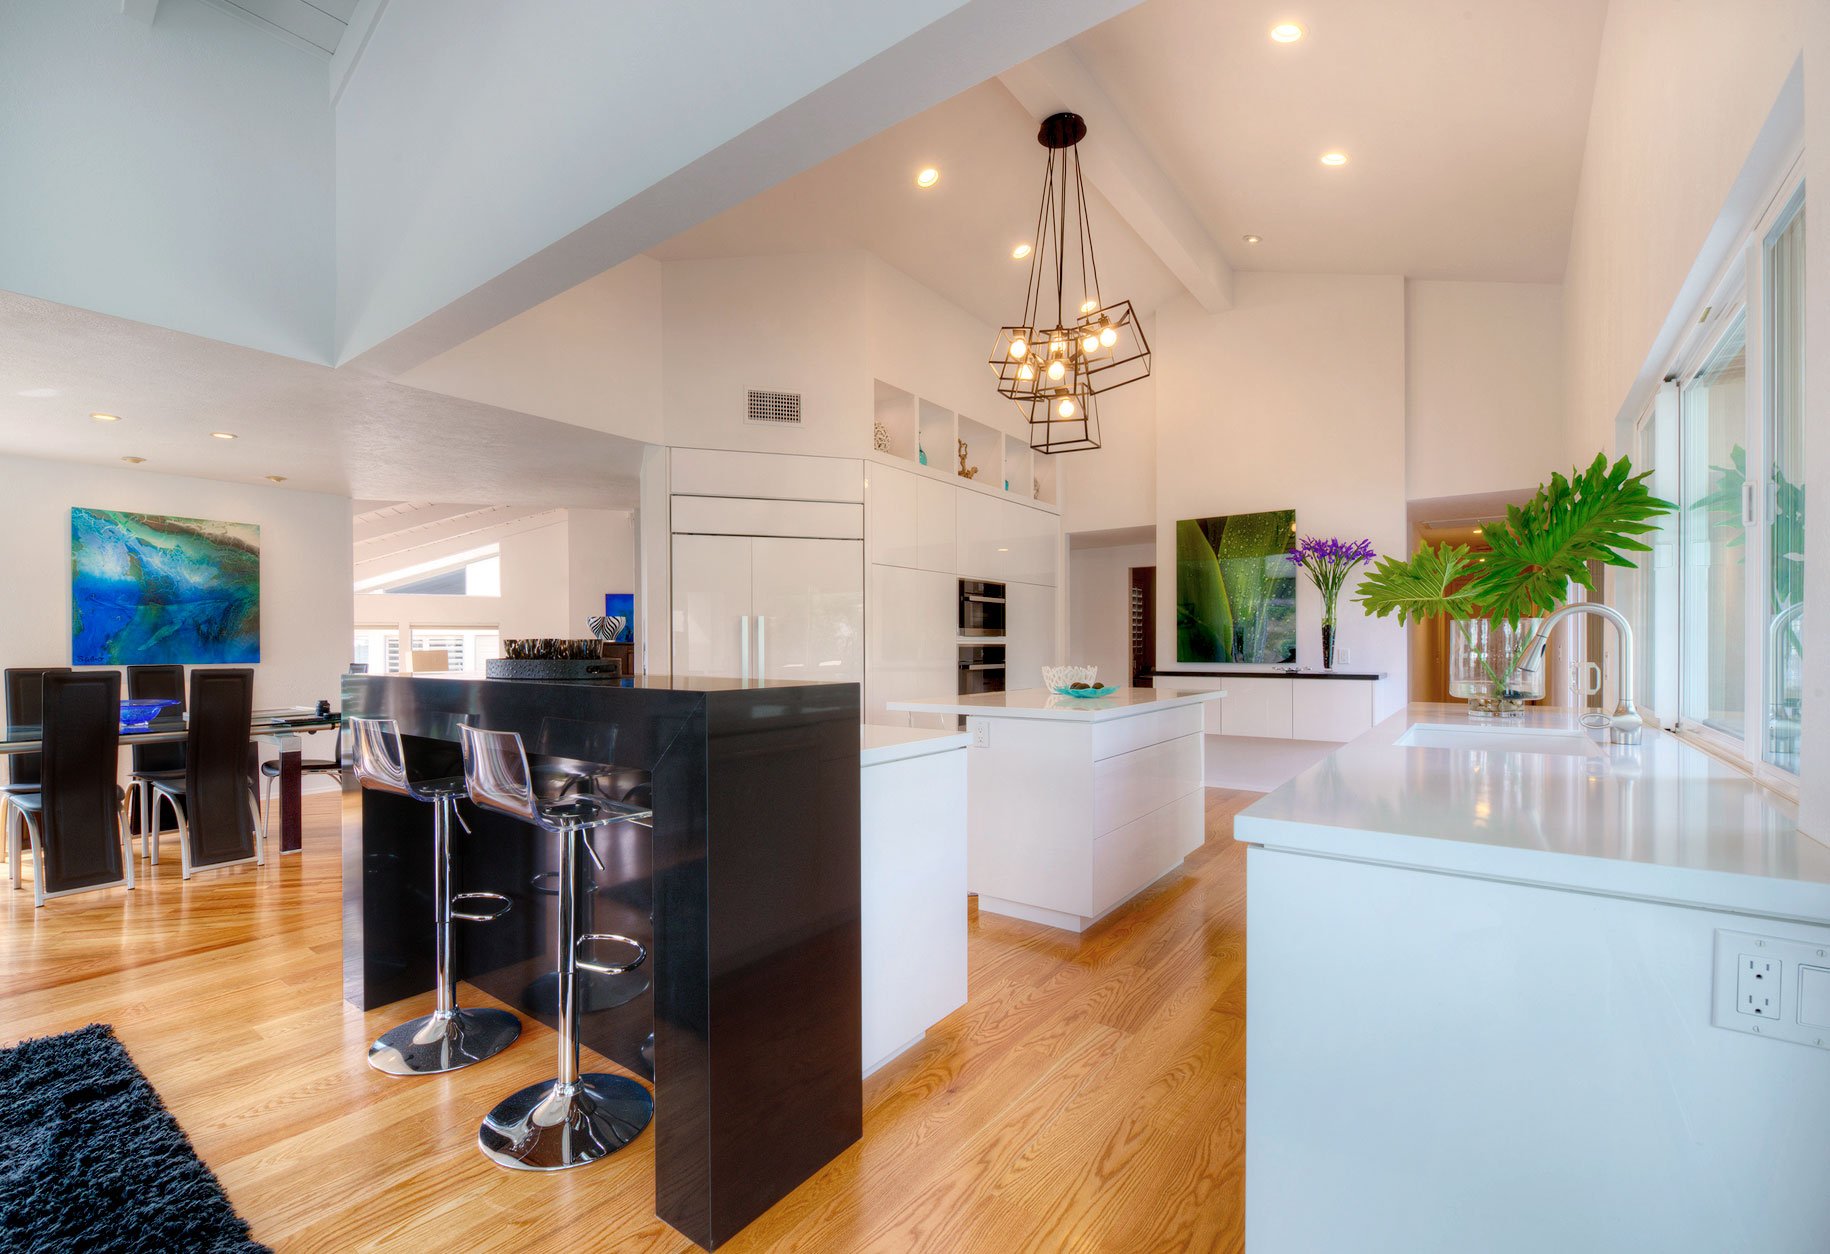 Kitchen Remodeling San Diego | Trusted Contractors Near Me ...